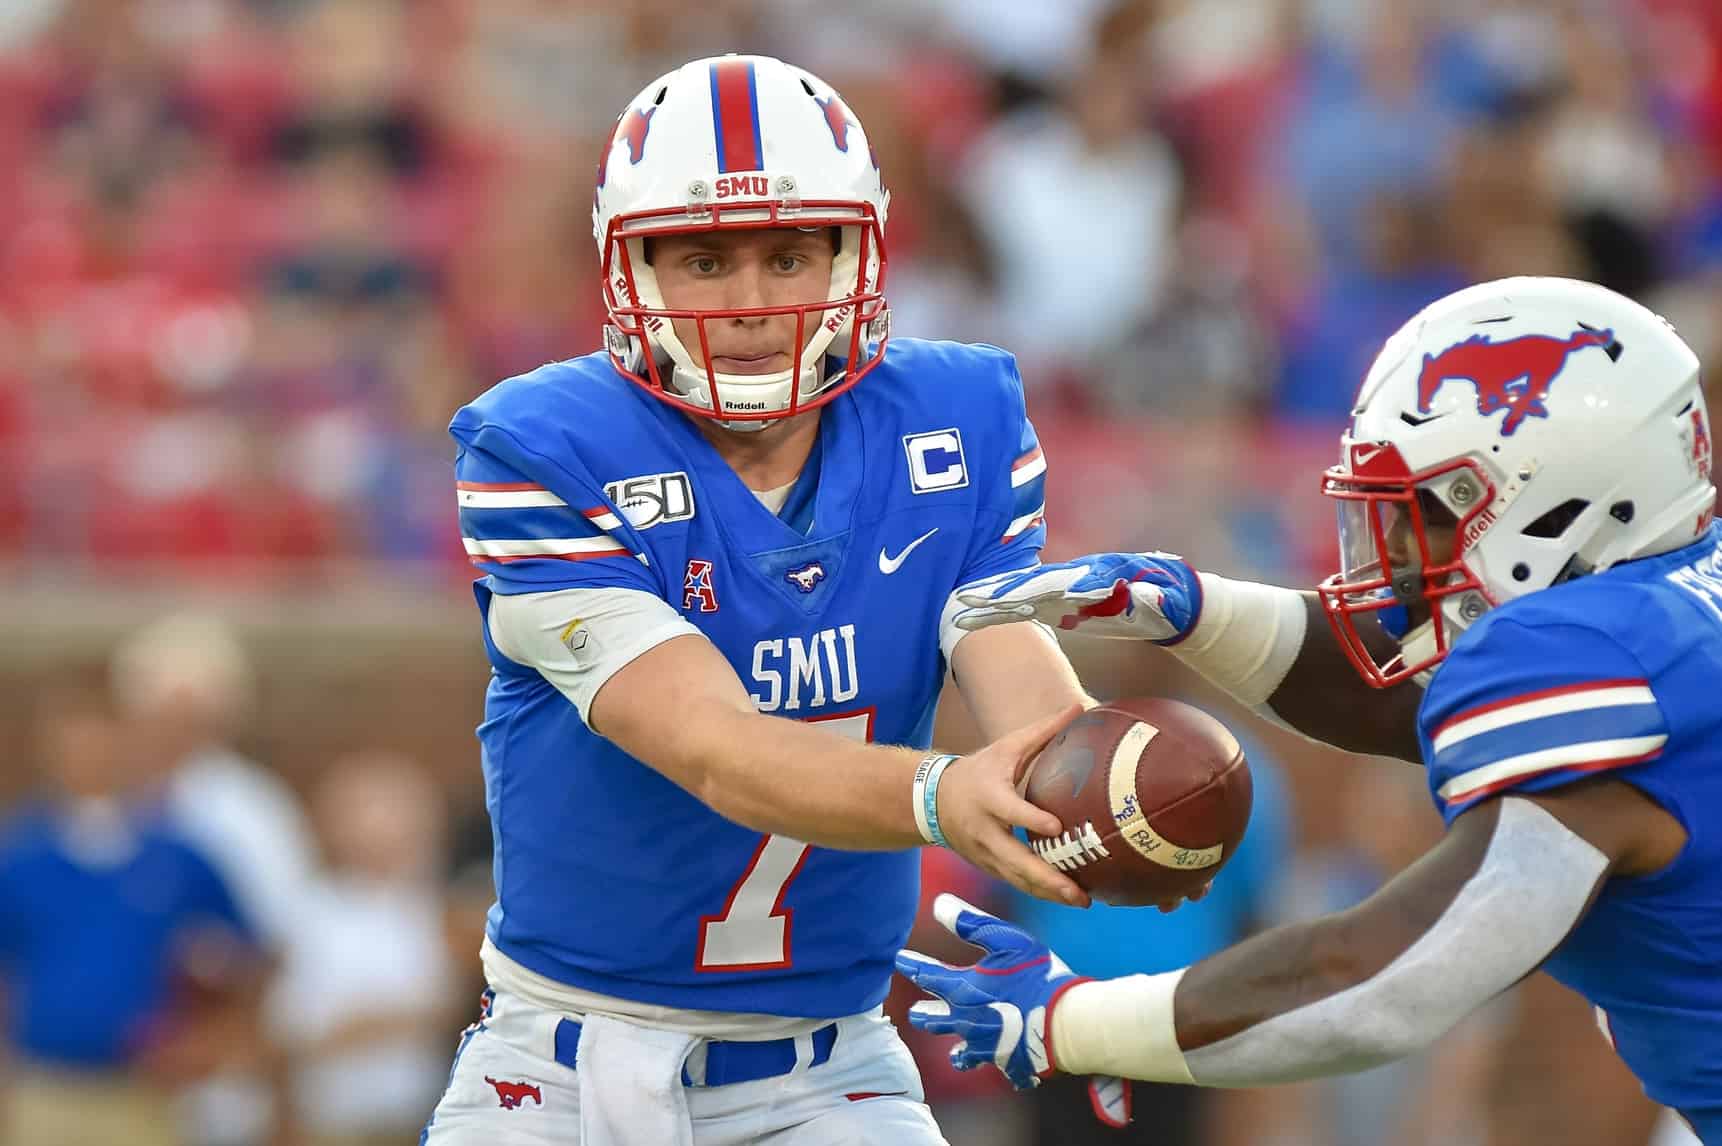 SMU Pro Day 2022 Date, prospects, rumors, and more